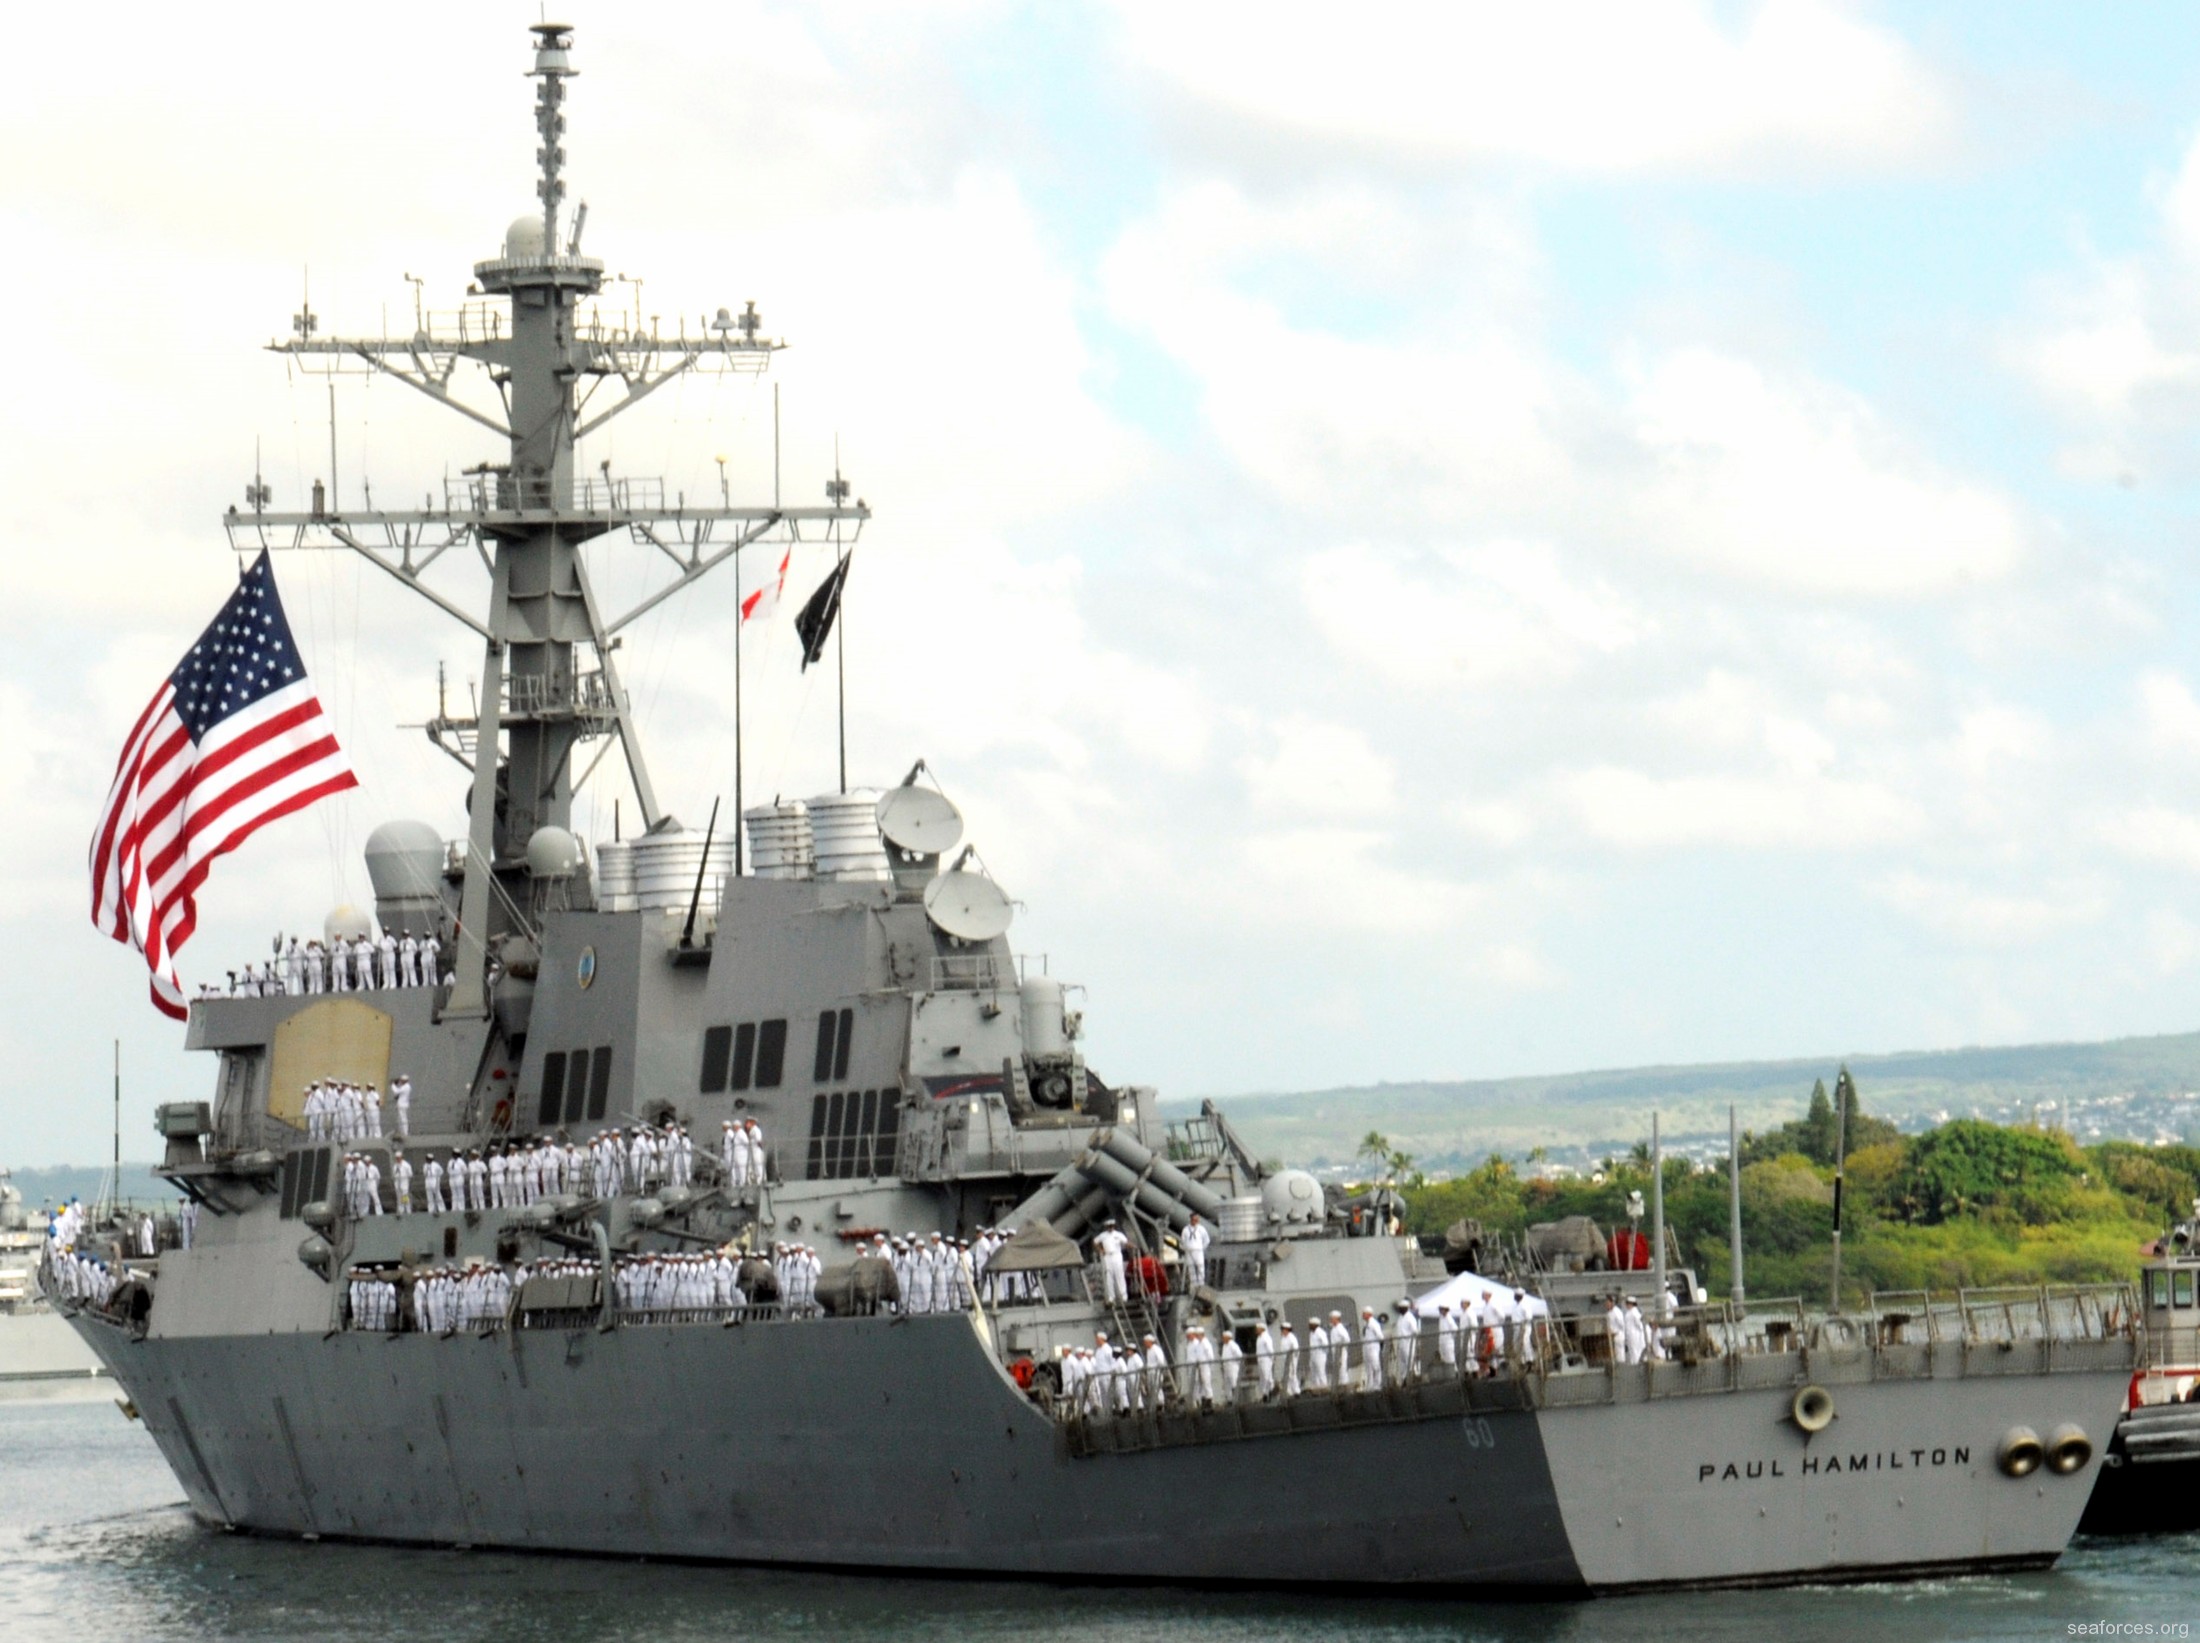 ddg-60 uss paul hamilton guided missile destroyer us navy 10 joint base pearl harbor hickam hawaii